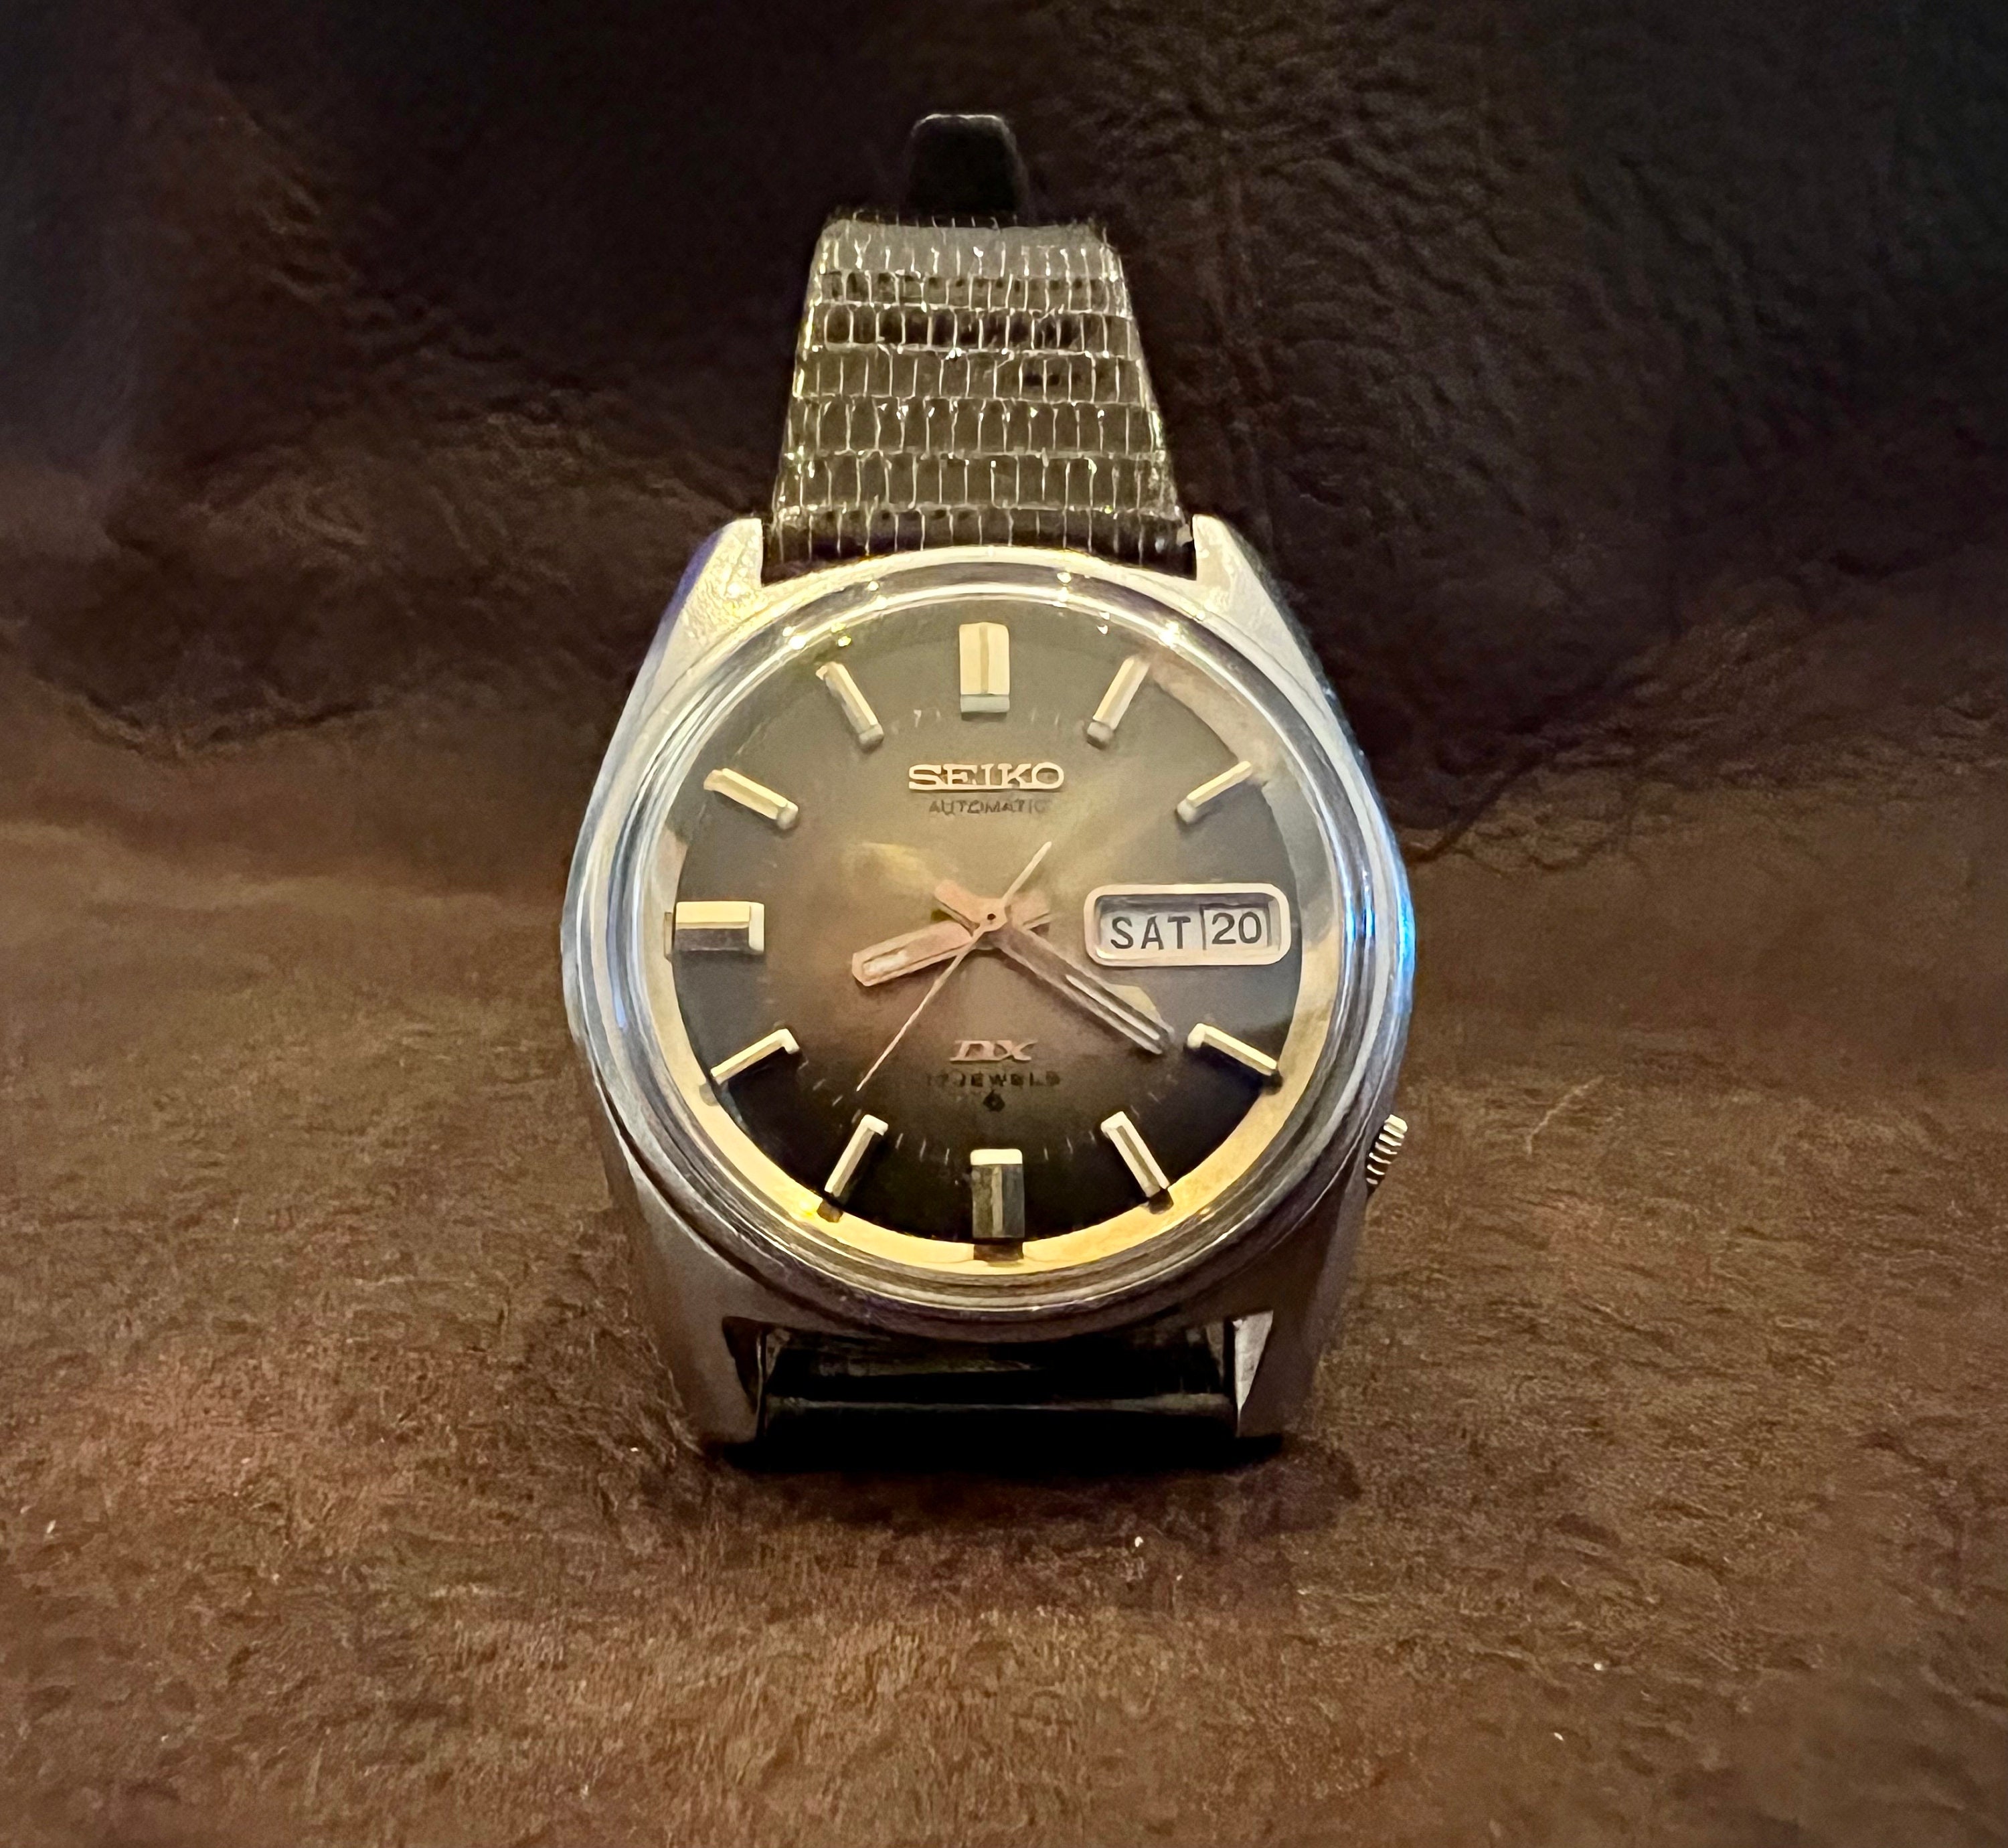 1975 Seiko DX Self Winding Automatic Watch on JB Champoin - Etsy